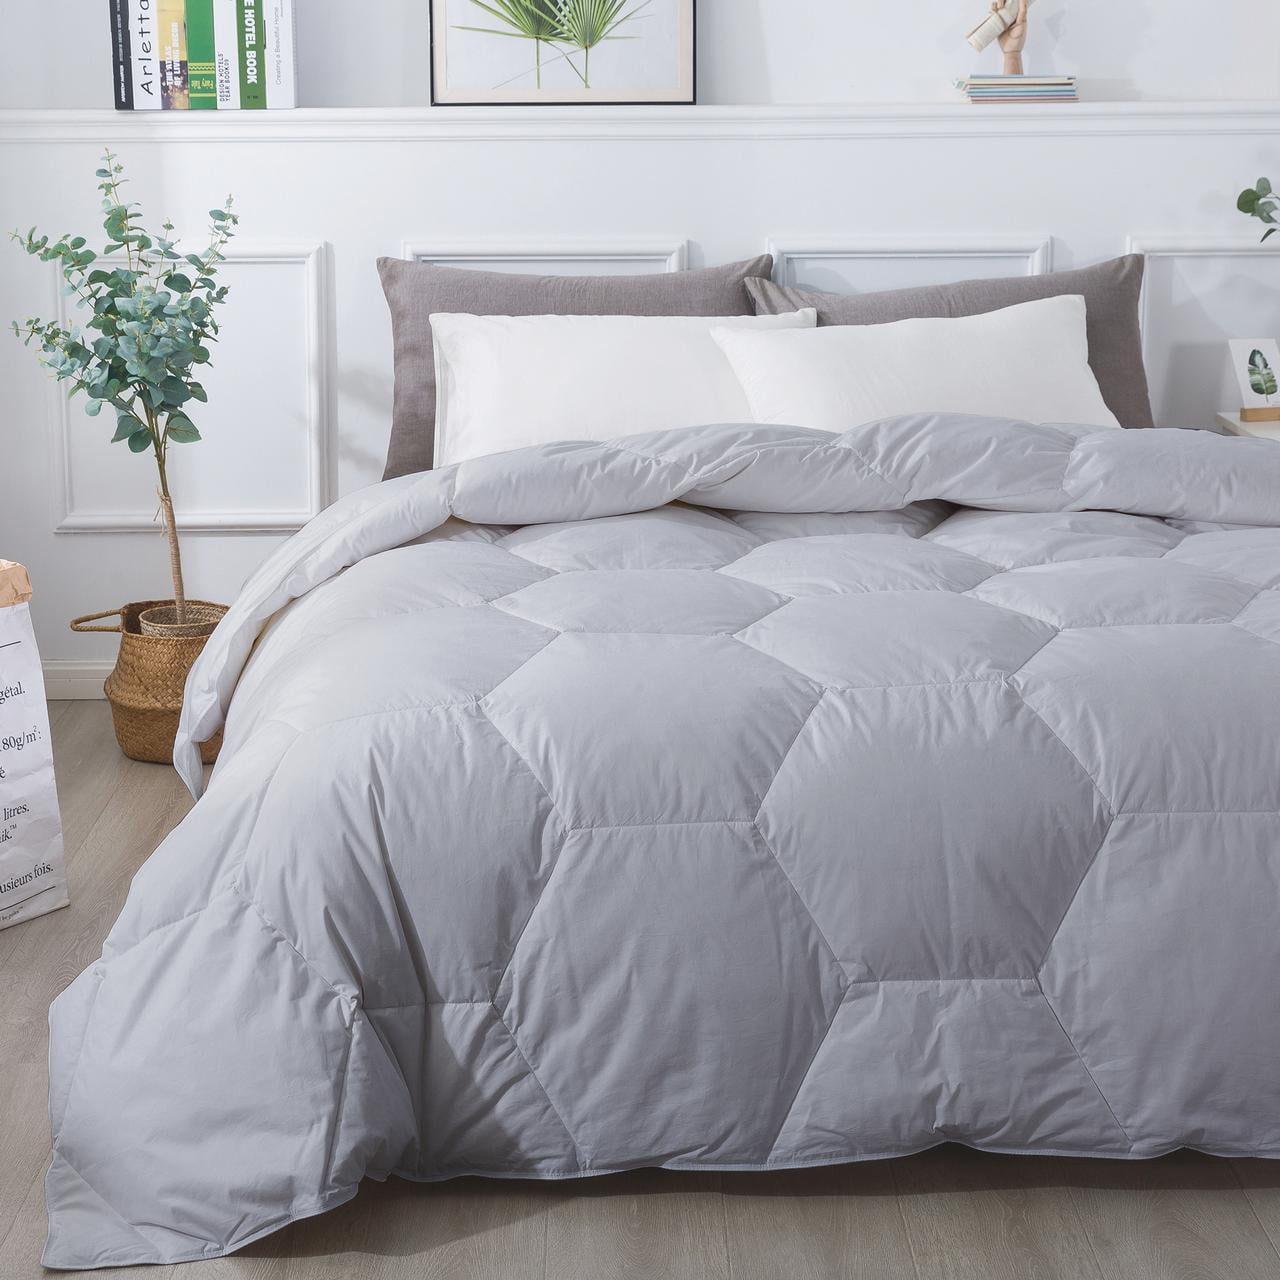 Details about   The Ultimate All Season Comforter Deal Hotel Luxury Down Alternative Comforter D 